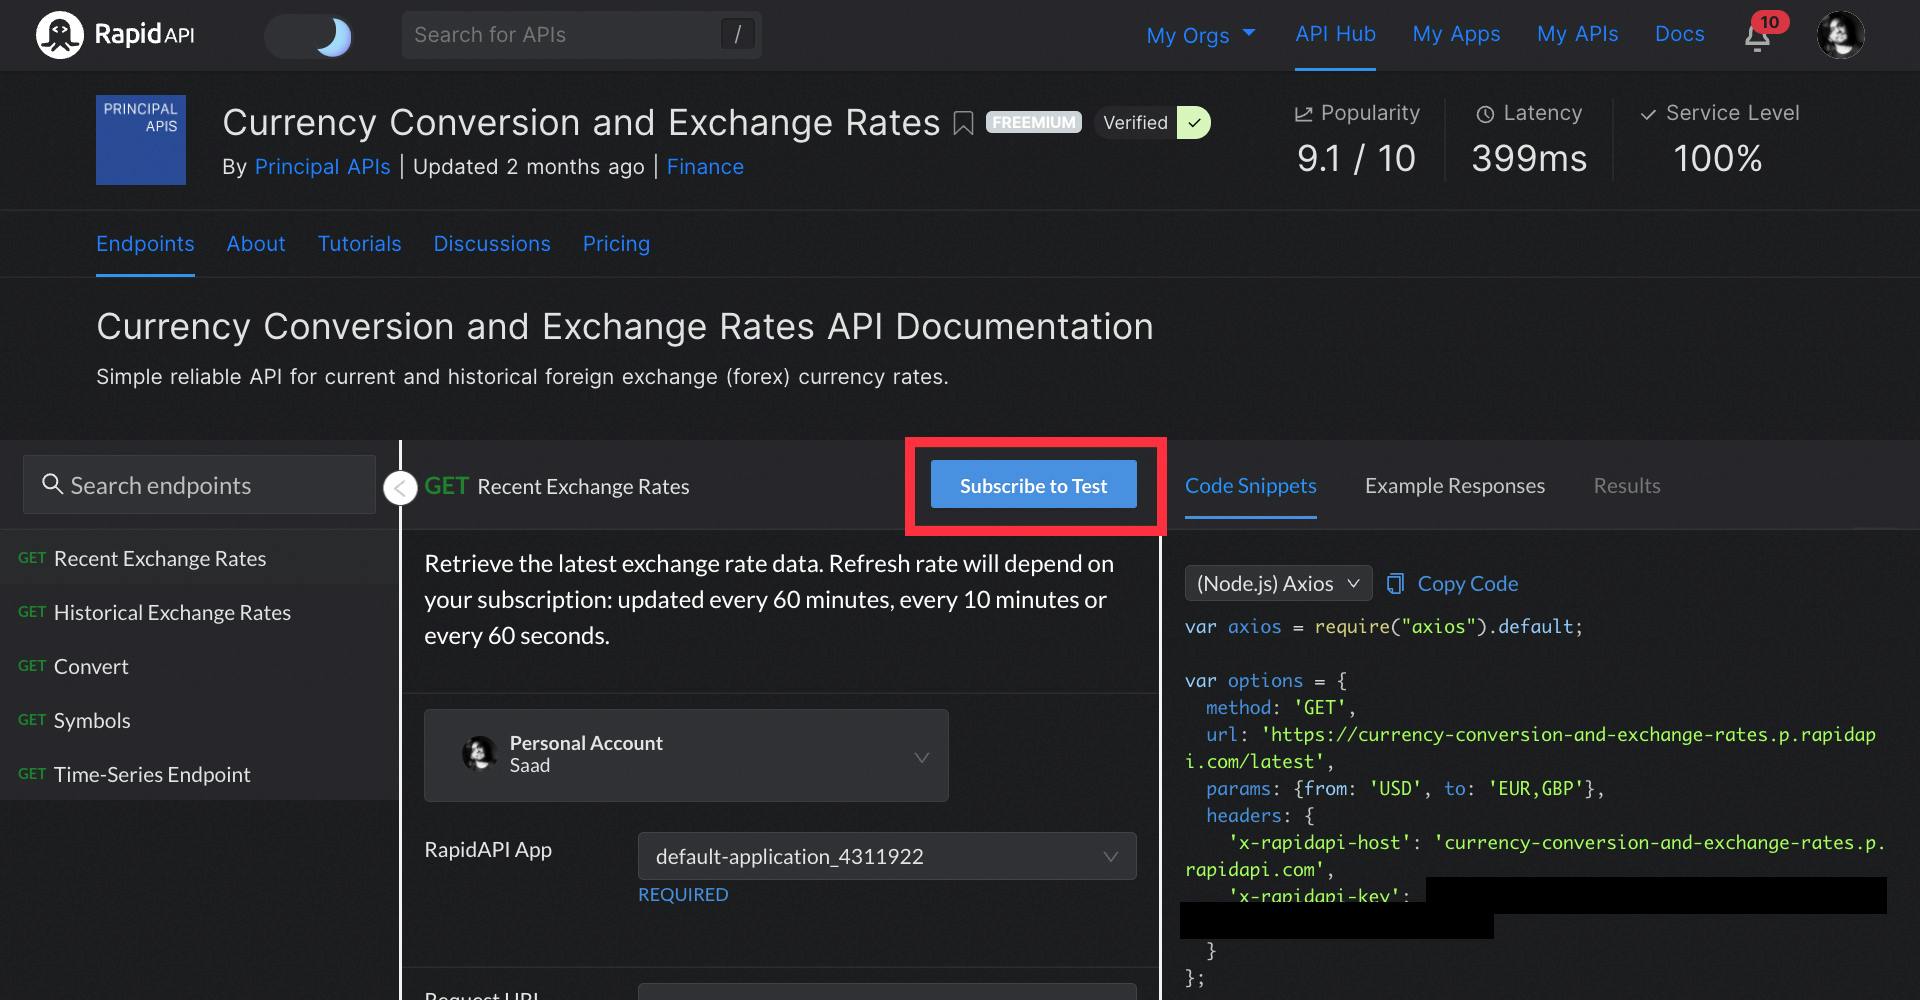 Subscribe to Currency Conversion and Exchange Rates API